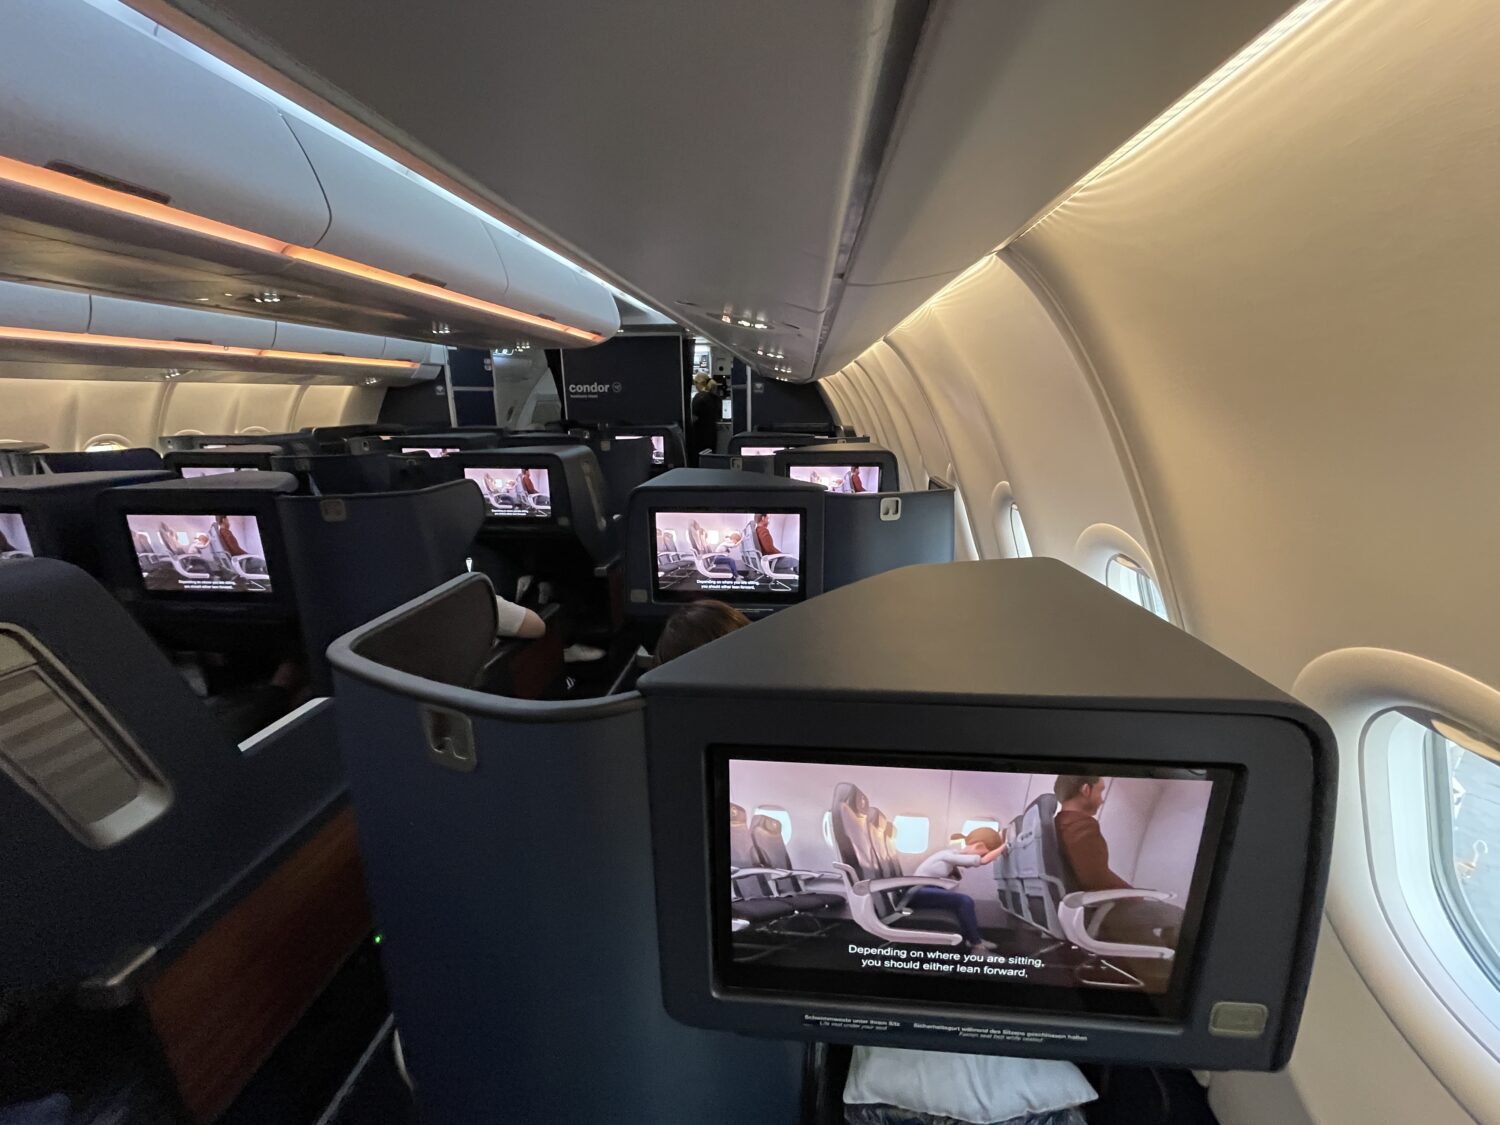 Condor Airlines Business Class TV